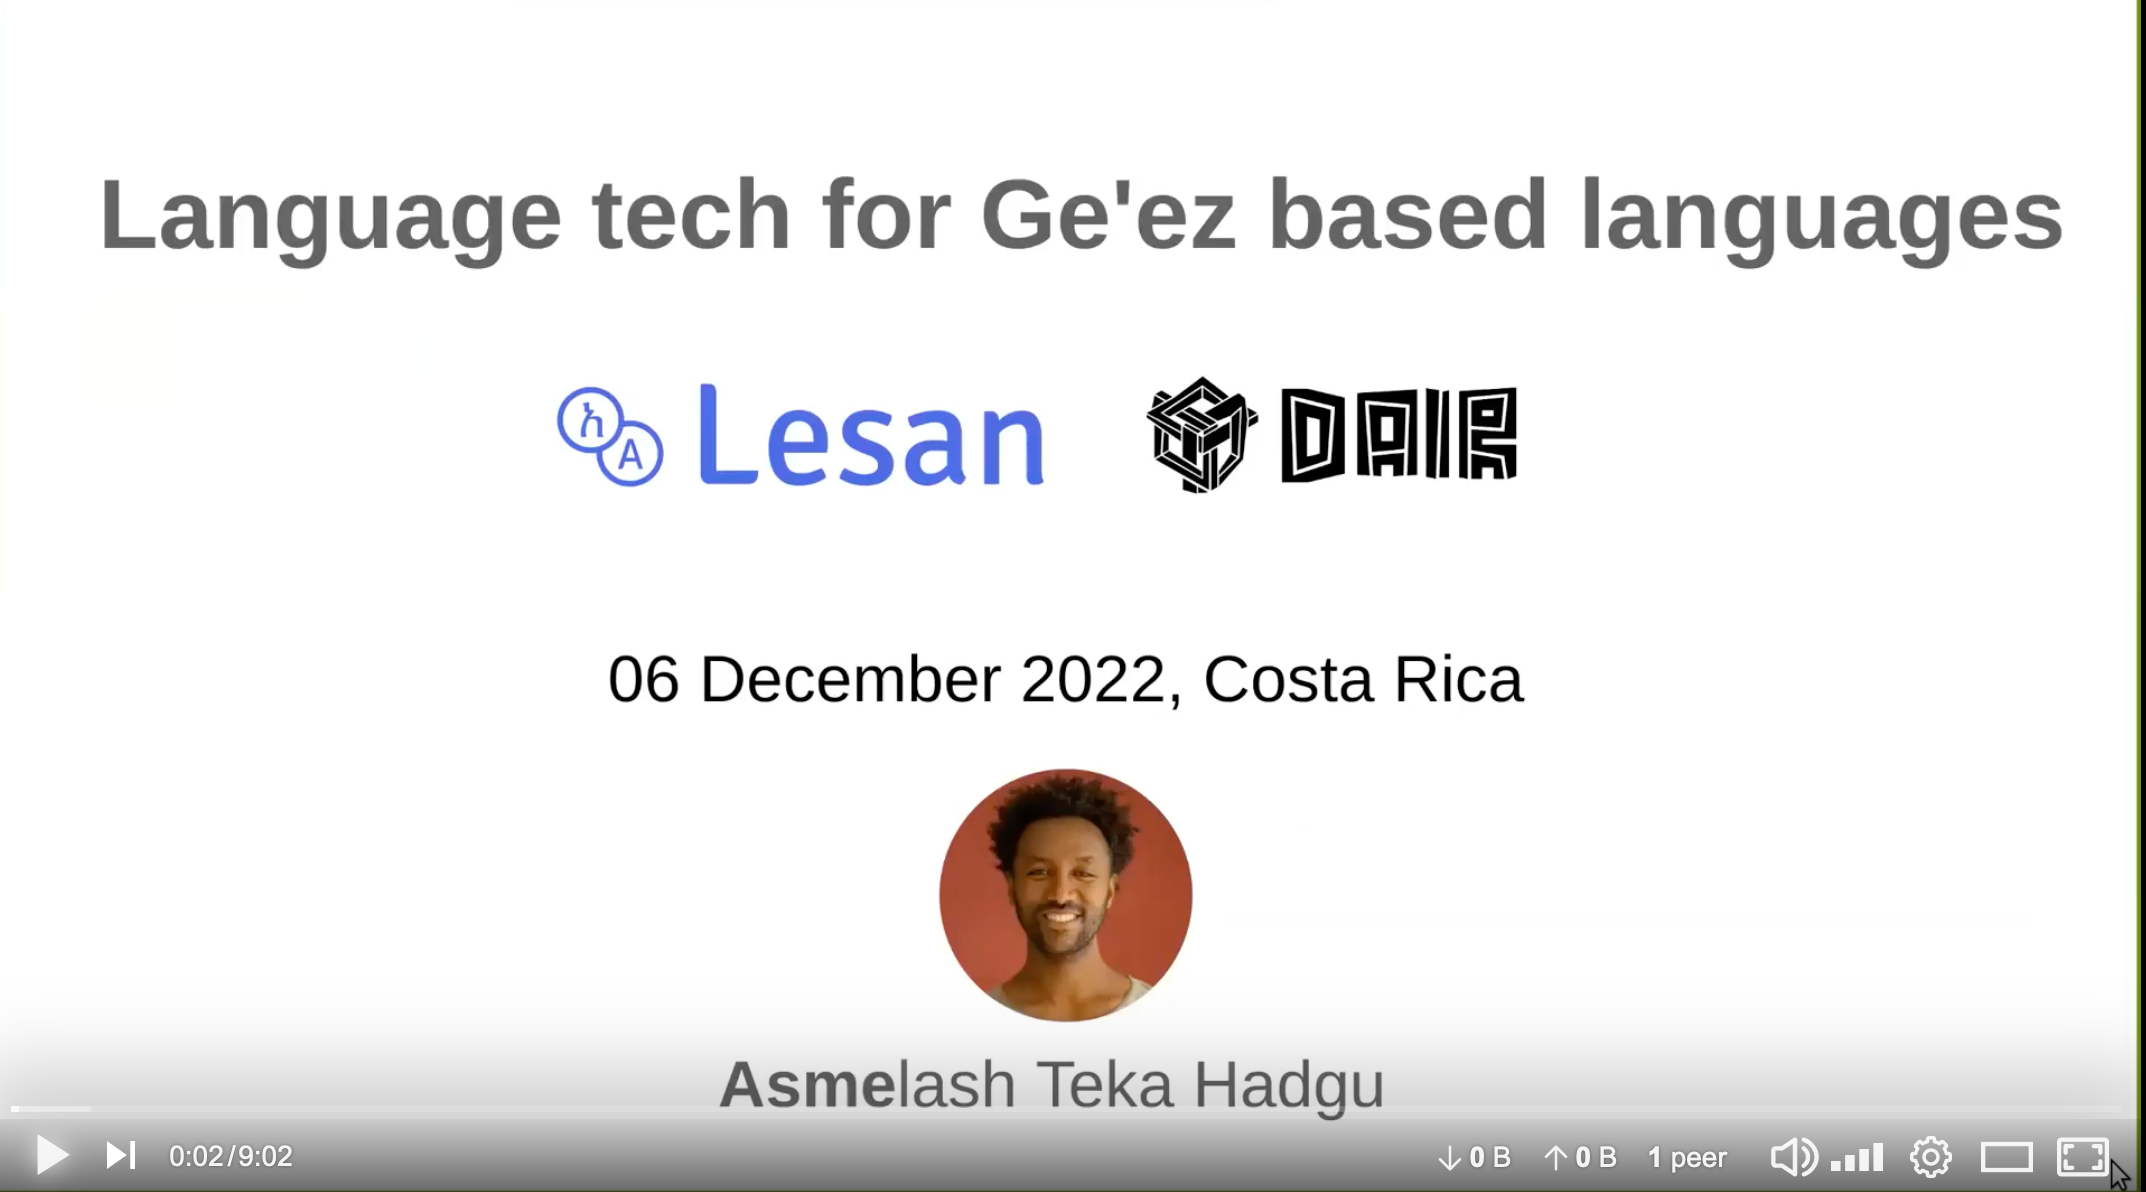 A screenshot of Asmelash's slides titled "Language tech for Ge'ez based languages" with Lesan and DAIR icons on the slides, and Asmelash's headshot. Date 06 December 2022, Costa Rica.